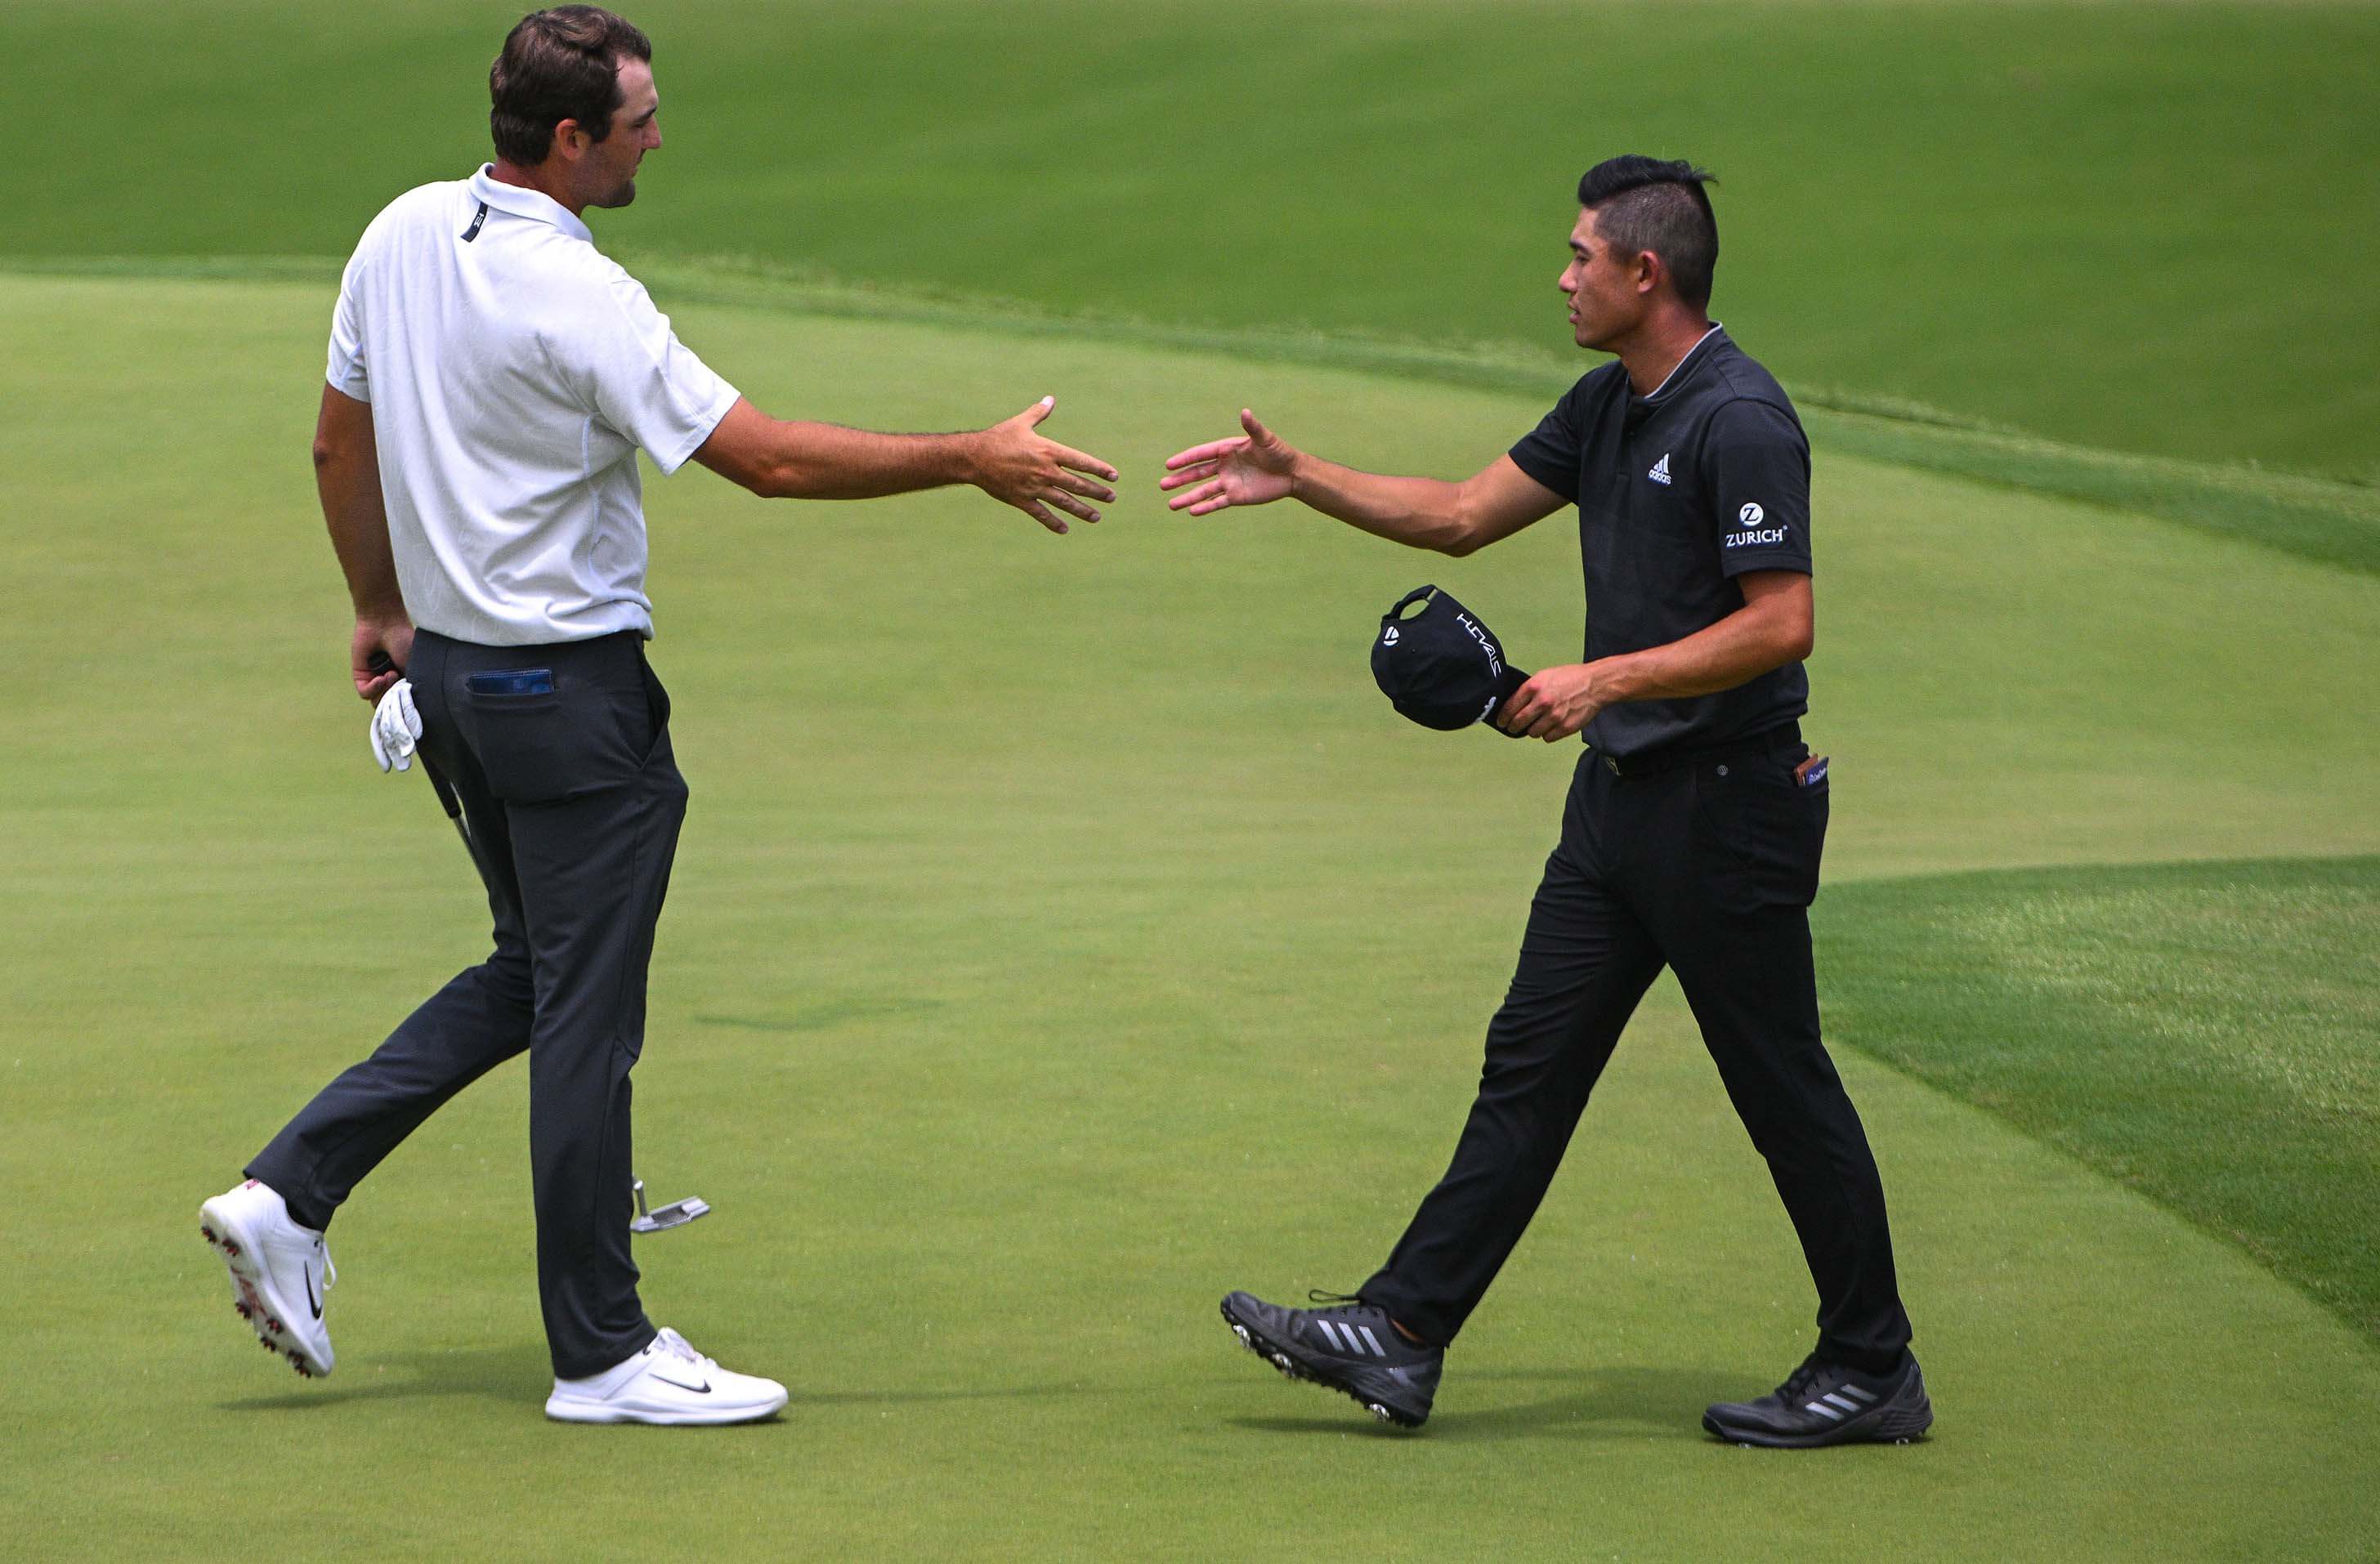 Scottie Scheffler (left) shakes hands with Collin Morikawa after they both finished the second round of the PGA Championship golf tournament at Southern Hills Country Club.